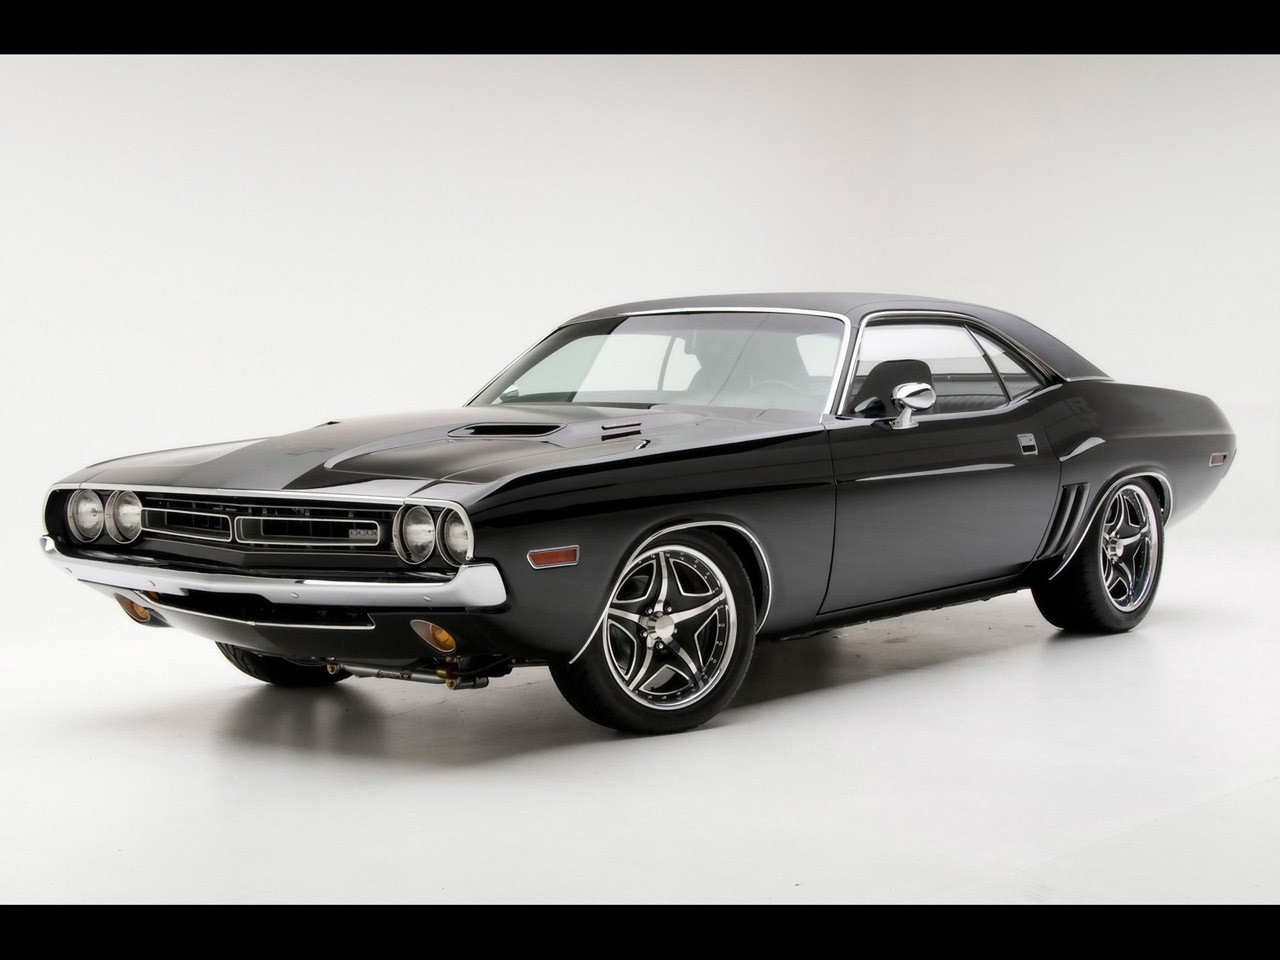 General 1280x960 car Dodge Dodge Challenger vehicle black cars simple background muscle cars American cars